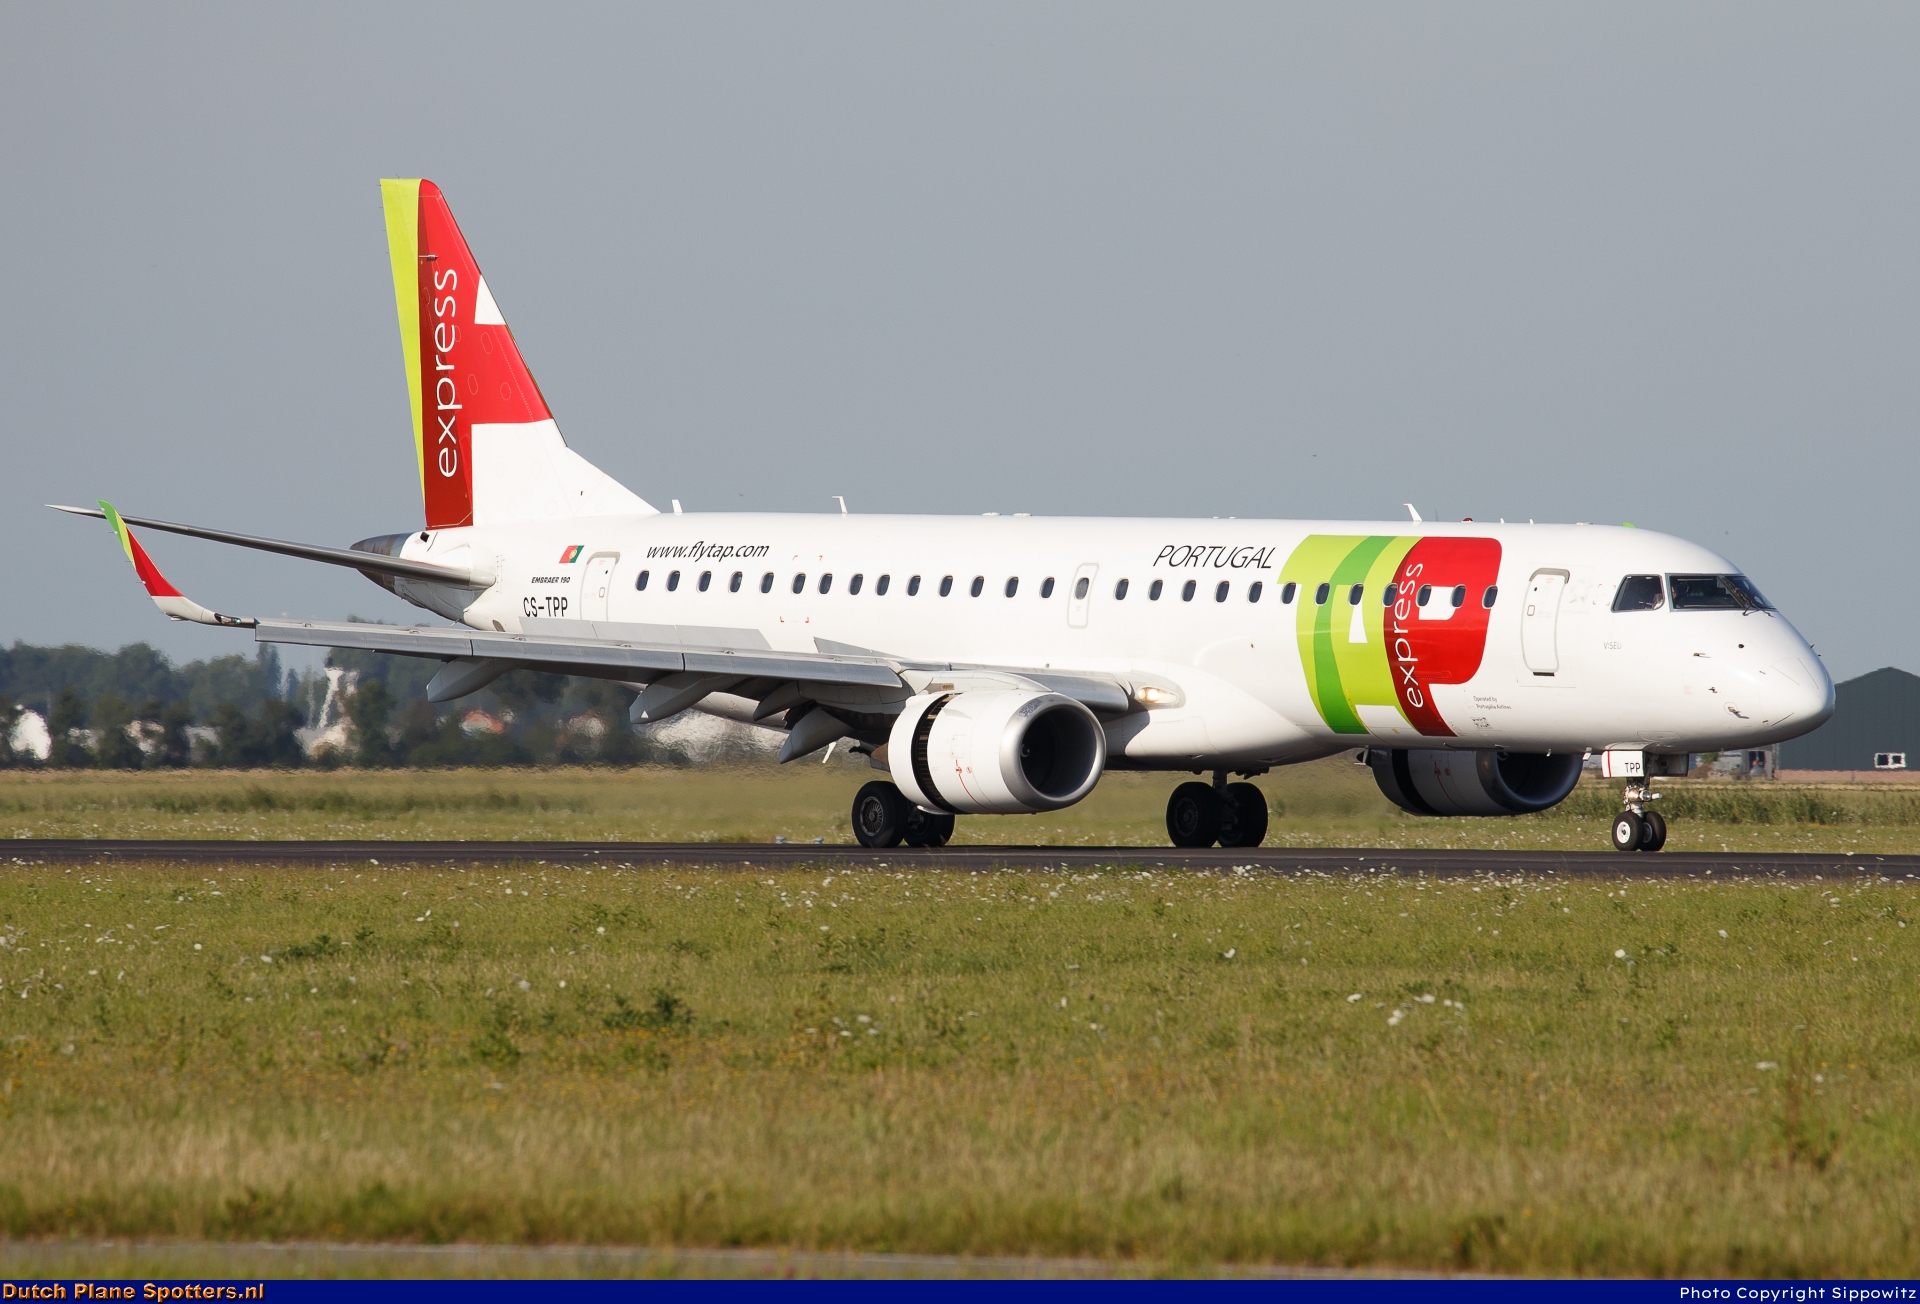 CS-TPP Embraer 190 PGA Portugalia Airlines (TAP Express) by Sippowitz